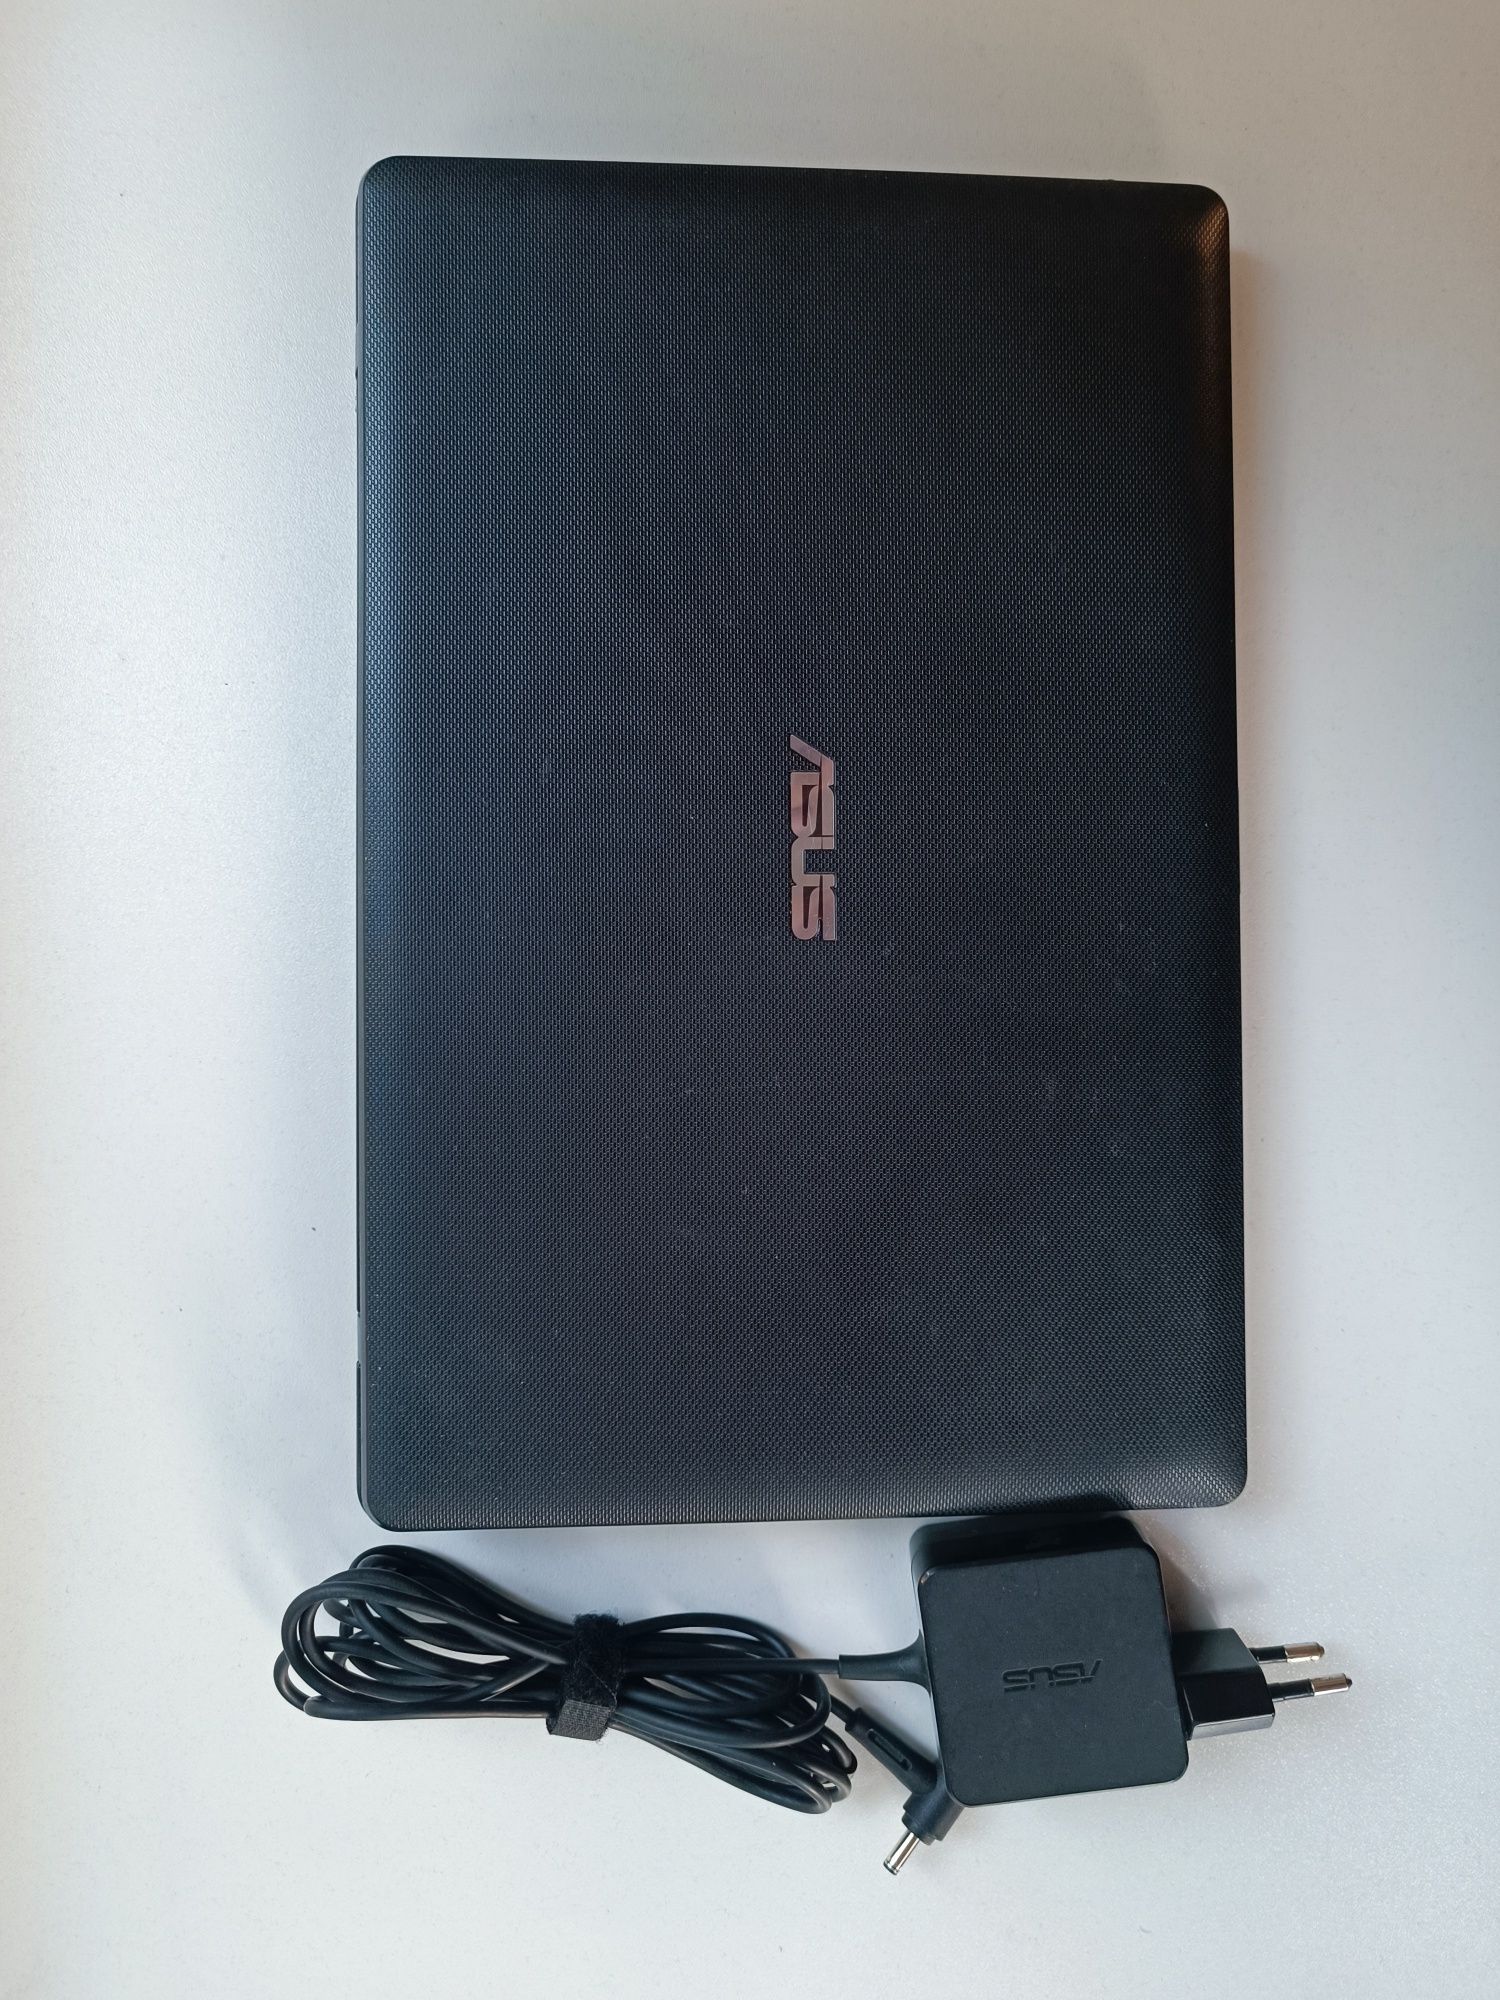 ASUS X200CA Notebook PC